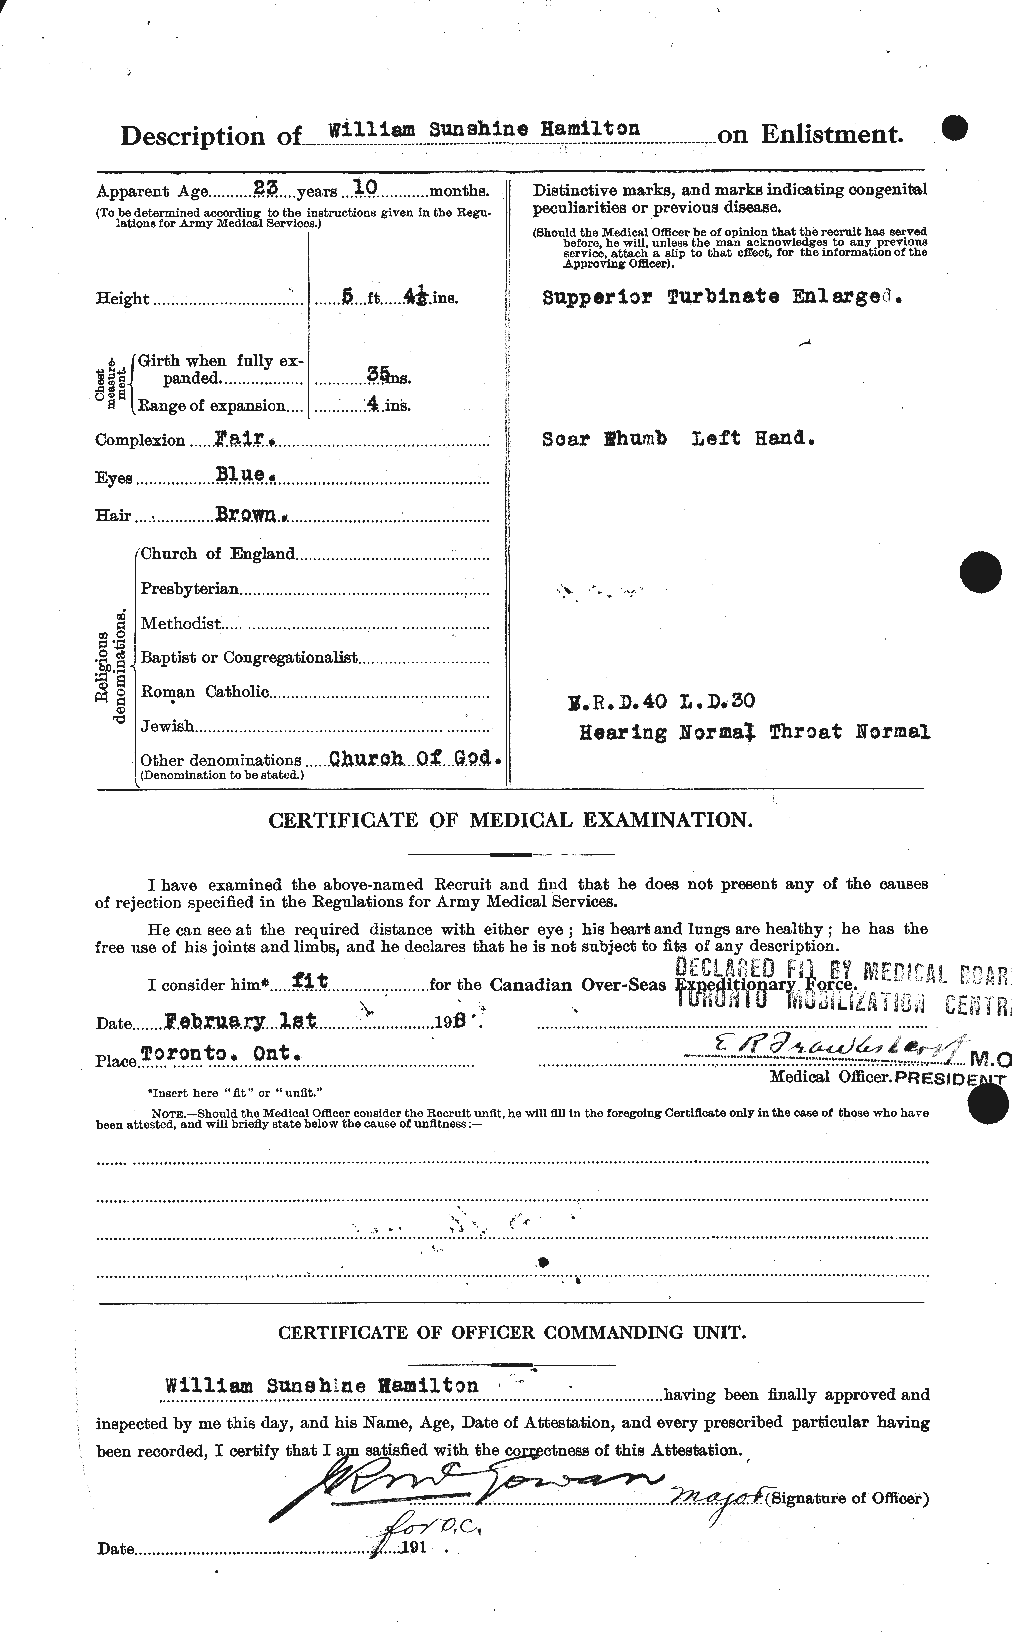 Personnel Records of the First World War - CEF 374929b